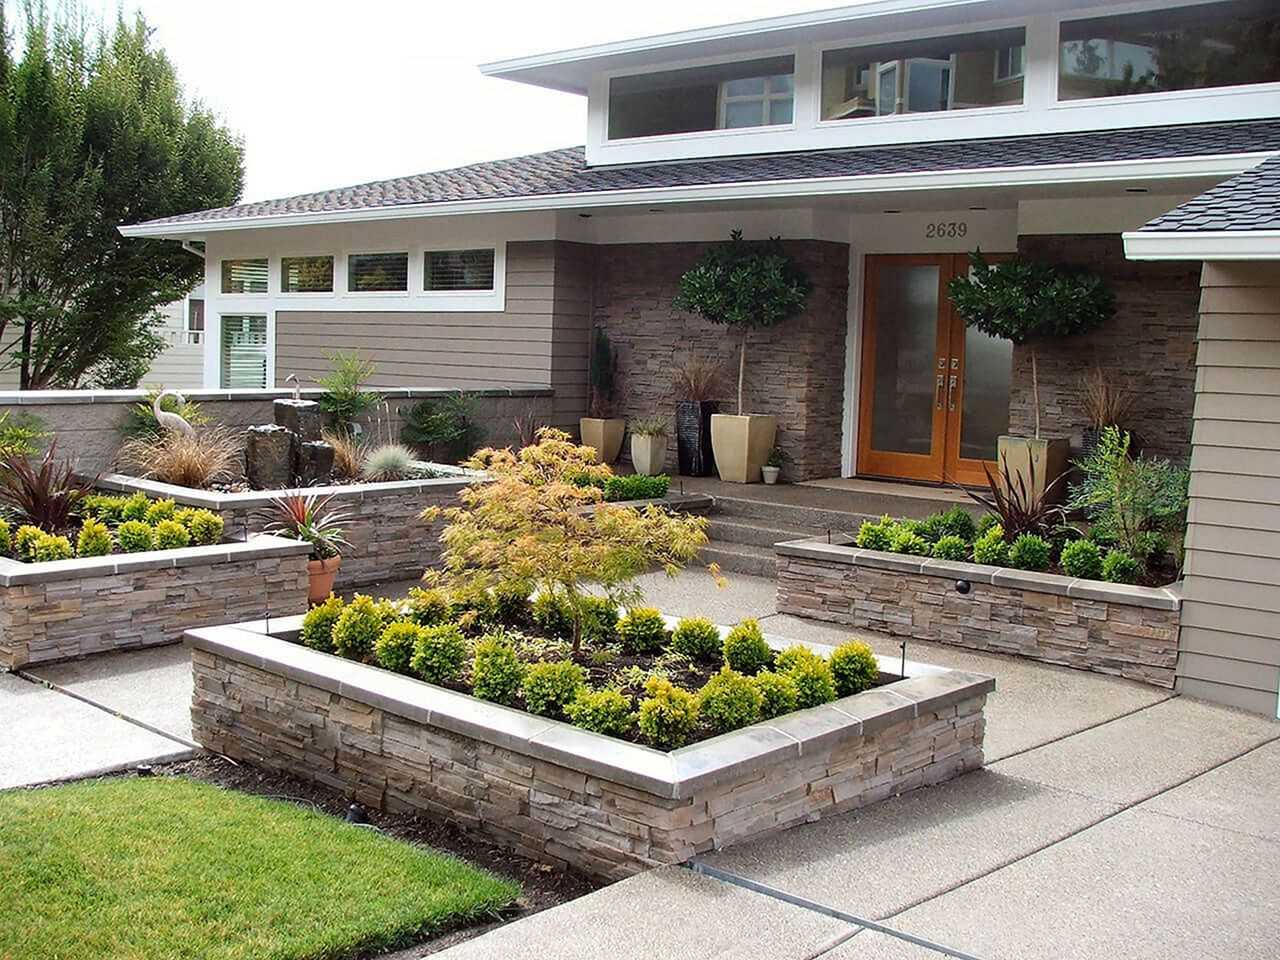 Landscape Ideas Front Yard
 25 Simple Front Yard Landscaping Ideas That You Need To